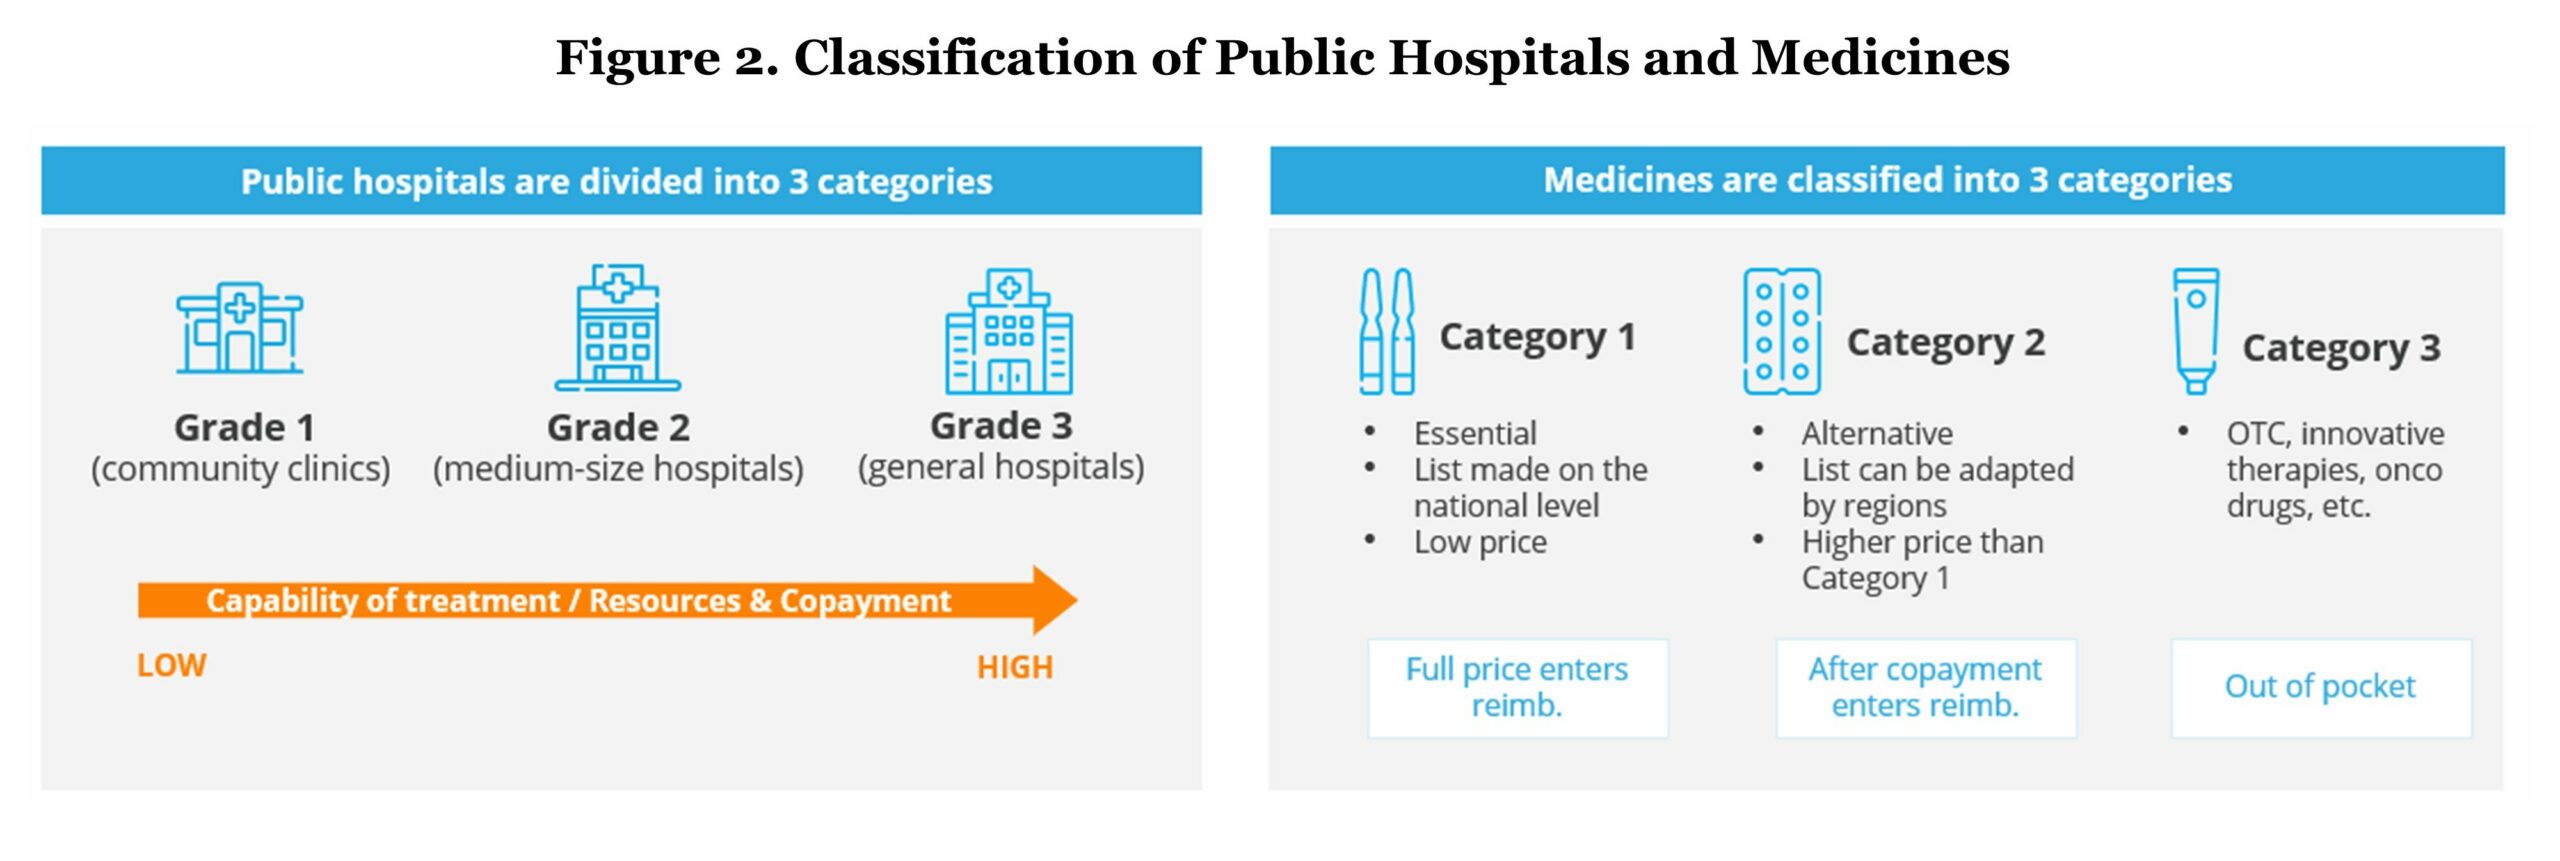 Figure 2. Classification of Public Hospitals and Medicines show two charts. In one it depicts public hospitals being divided into 3 categories: Grade 1 (community clinics), Grade 2 (medium-sized hospitals), Grade 3 (general hospitals). In the other is shows medicines are classified into 3 categories: category 1 (essential, list made on the national level, low price), category 2 (alternative, list can be adapted by region, higher price than category 1), and category 3 (OTC, innovative therapies, onco drugs, etc.) 